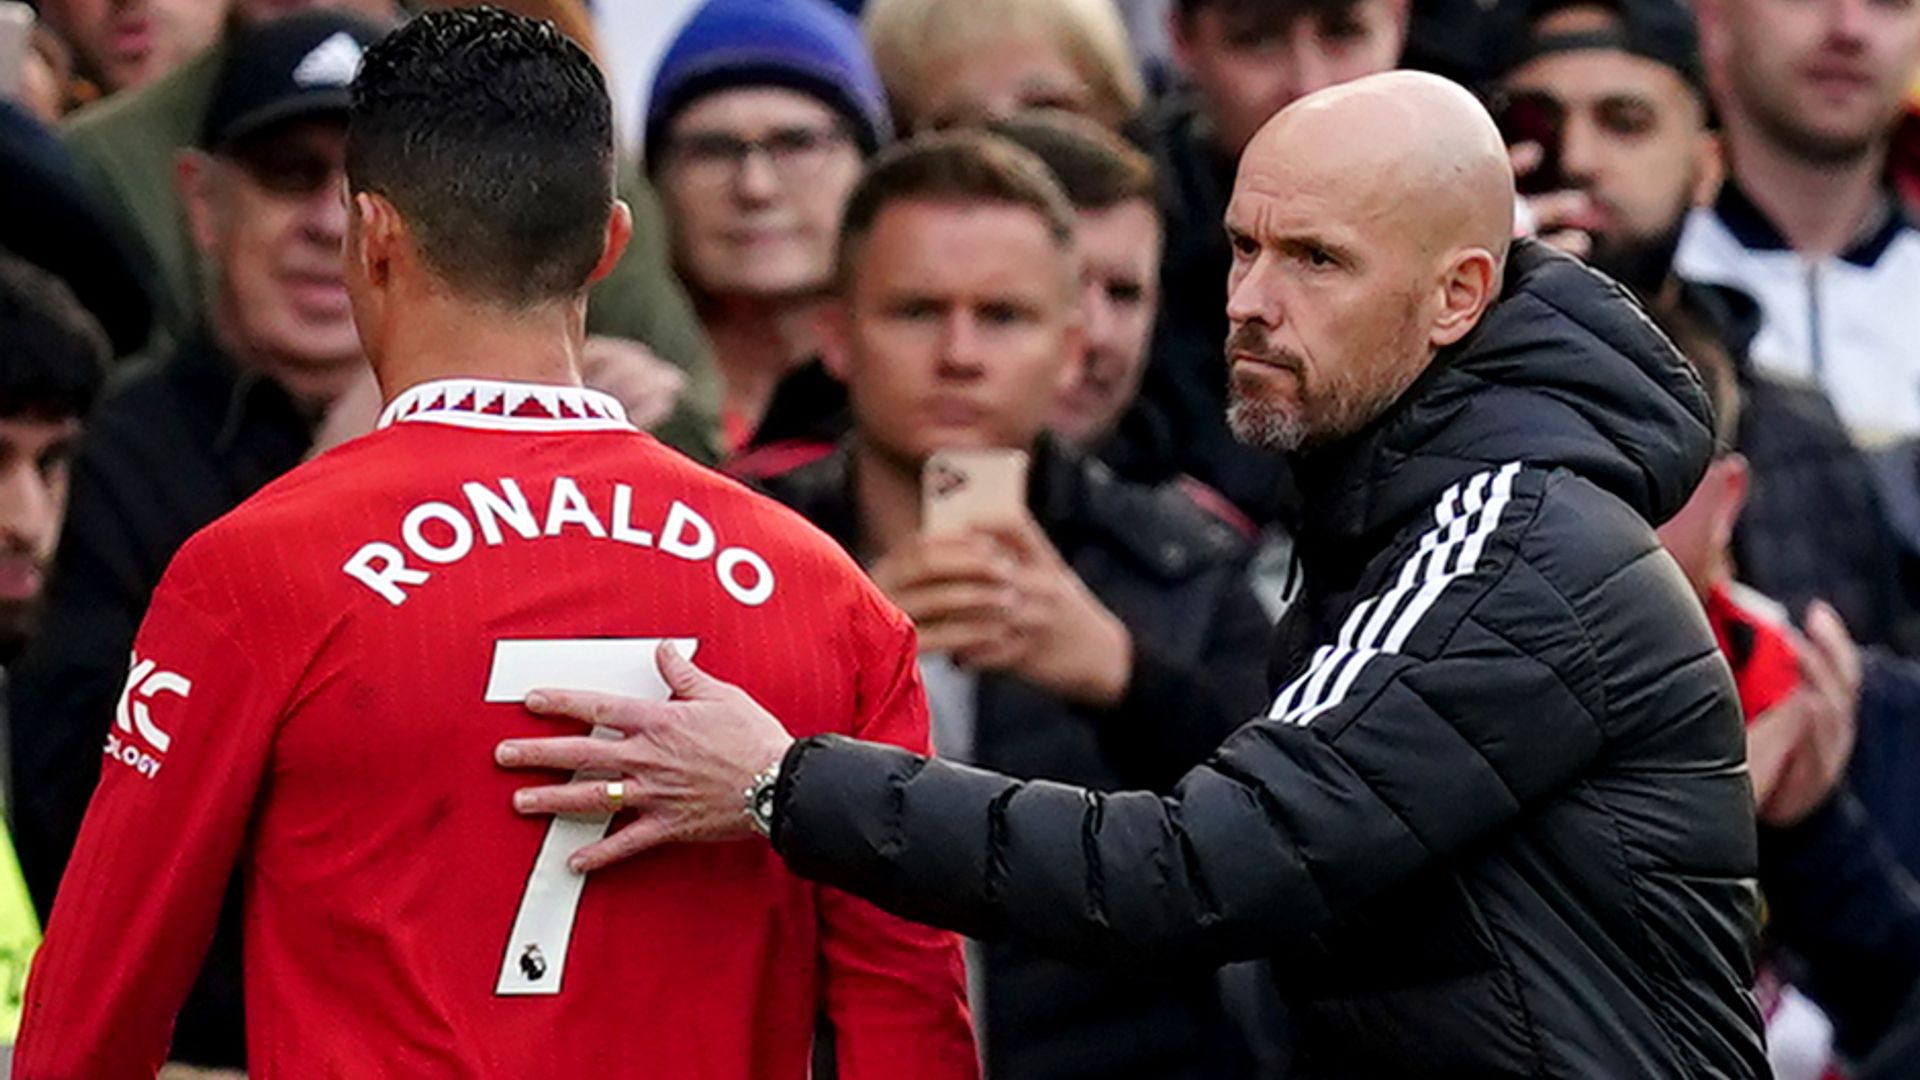 Ten Hag: Ronaldo is gone, it’s in the past | 'We're headed in right direction'